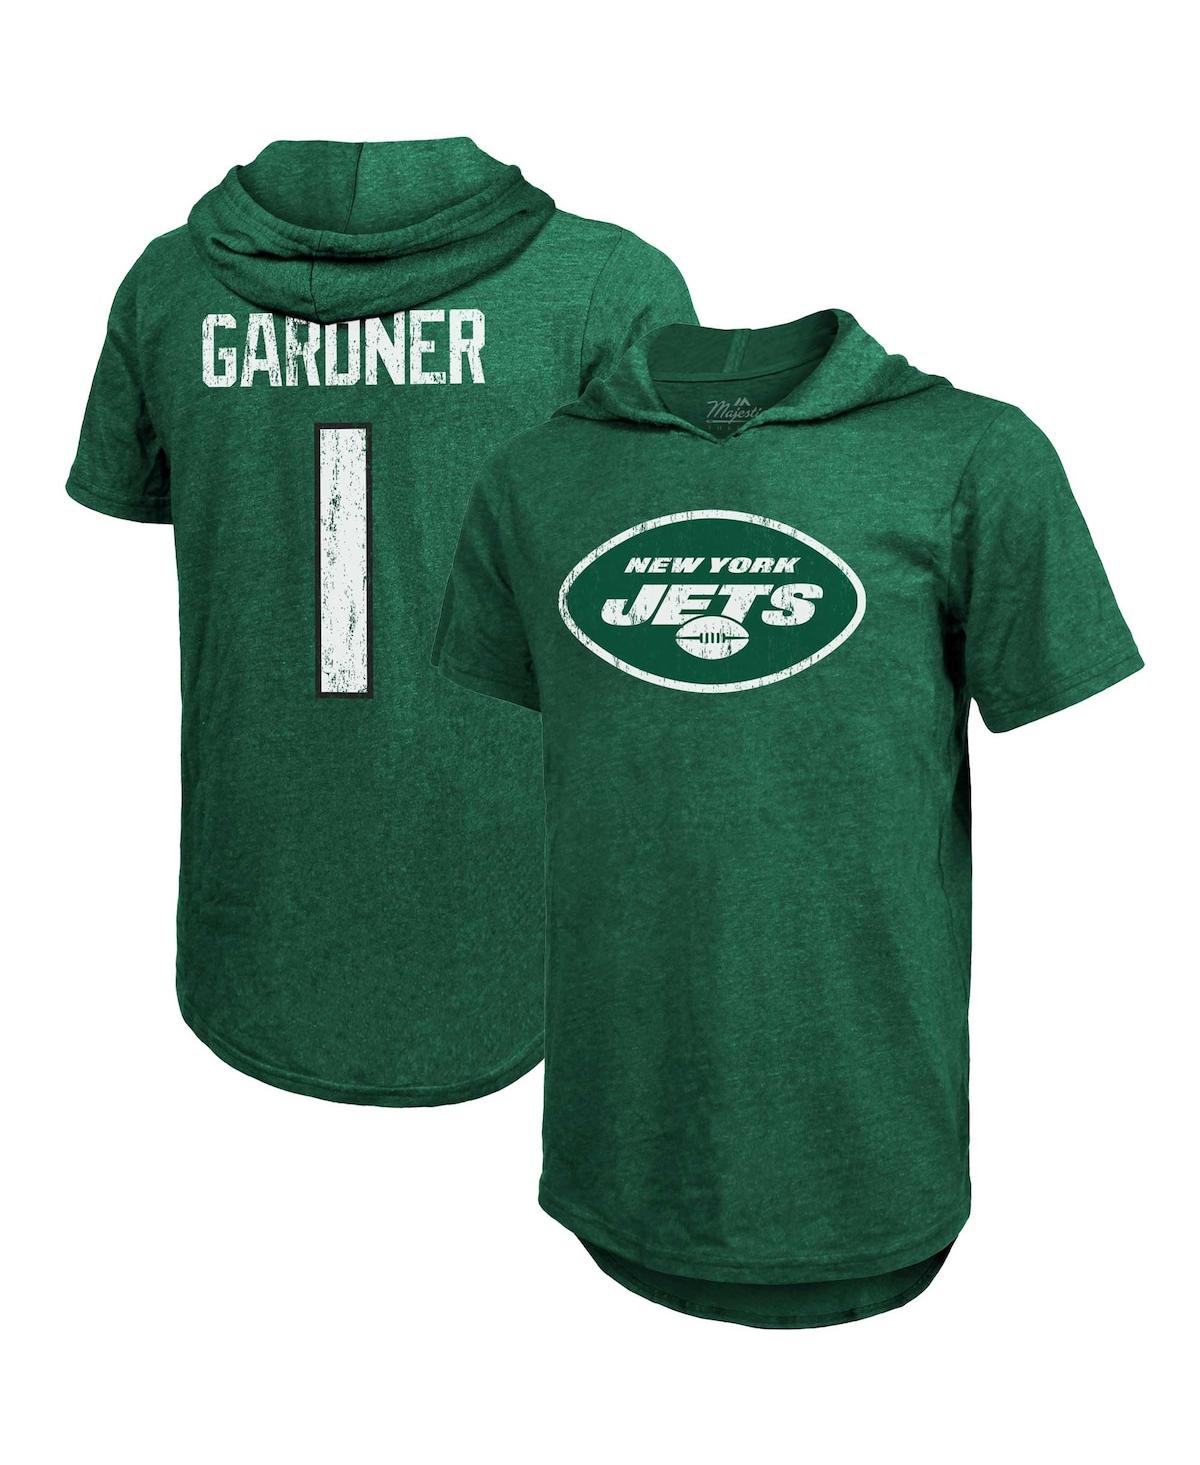 Men's Majestic Threads Ahmad Sauce Gardner Heather Green New York Jets Player Name and Number Tri-Blend Hoodie T-shirt - Heather Green